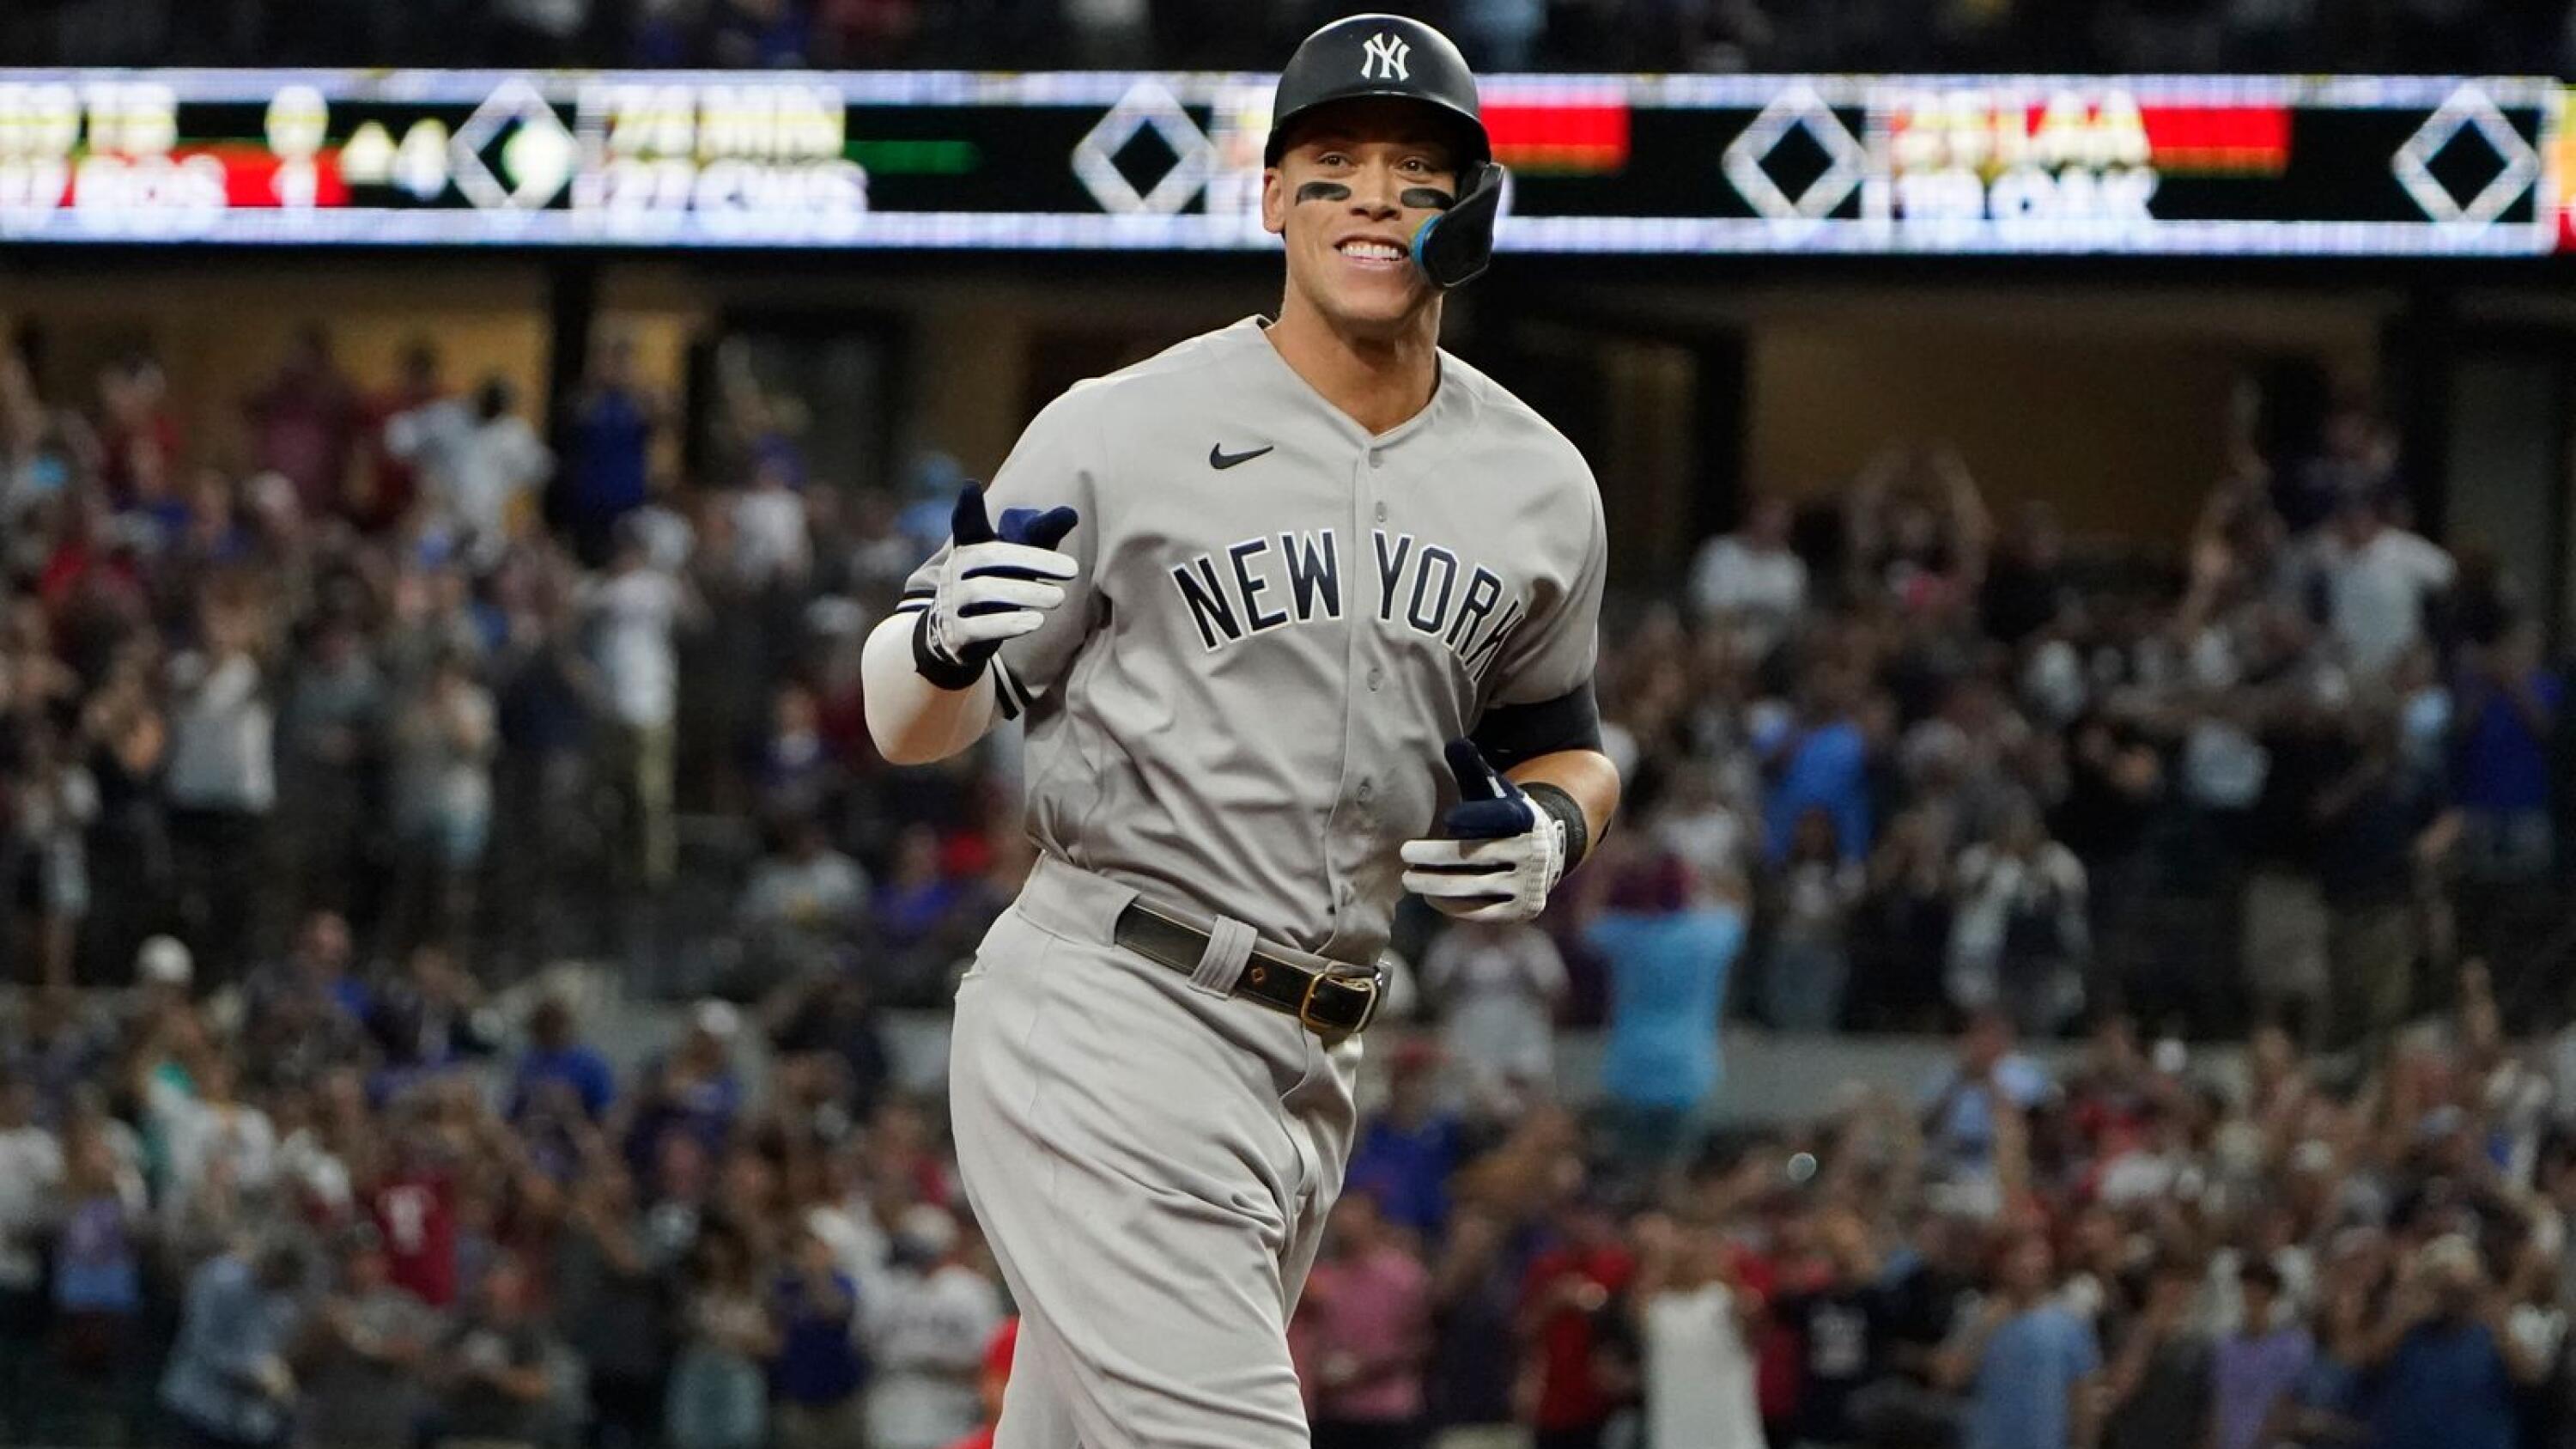 Aaron Judge keeps focus on winning during historic homer chase